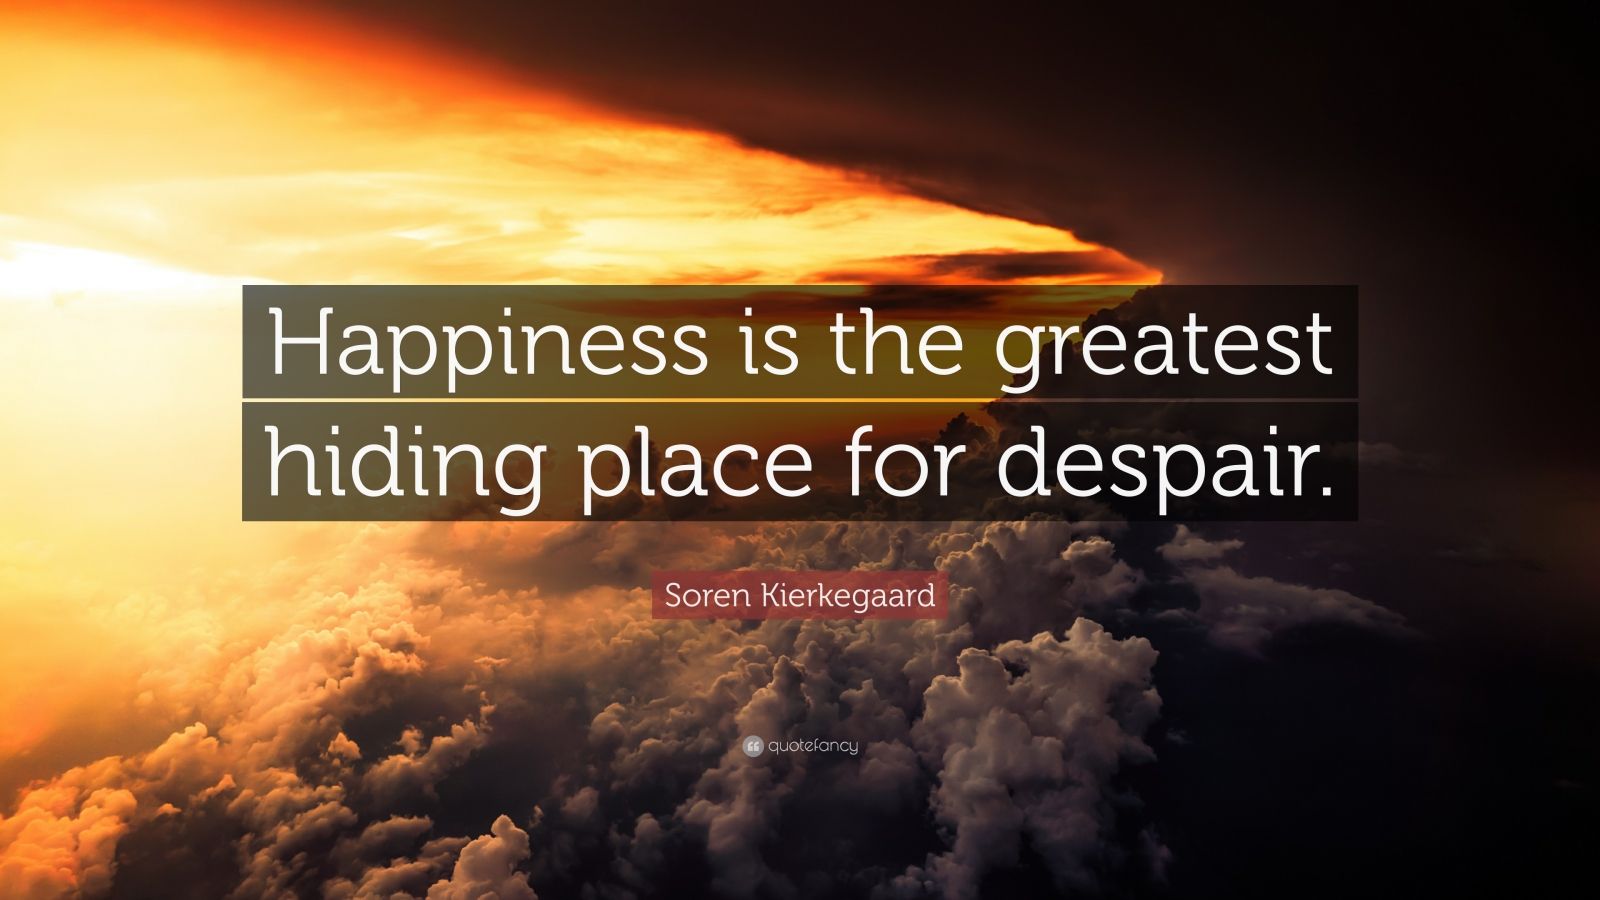 i lost my way finding happiness after despair